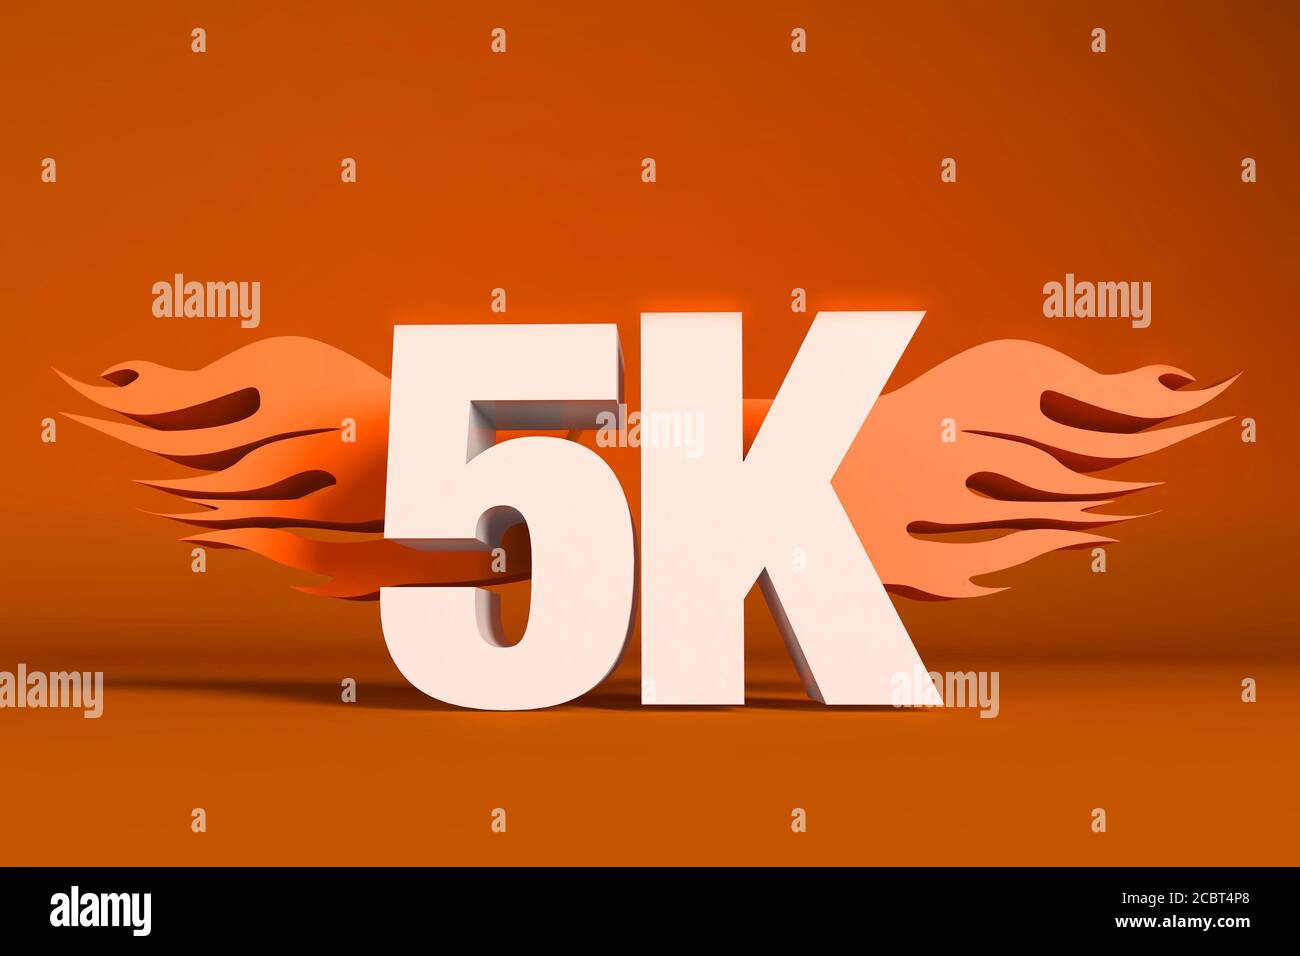 3D RENDER OF THE WORD 5K ON AN ORANGE BACKGROUND WITH FLAMES Stock Photo